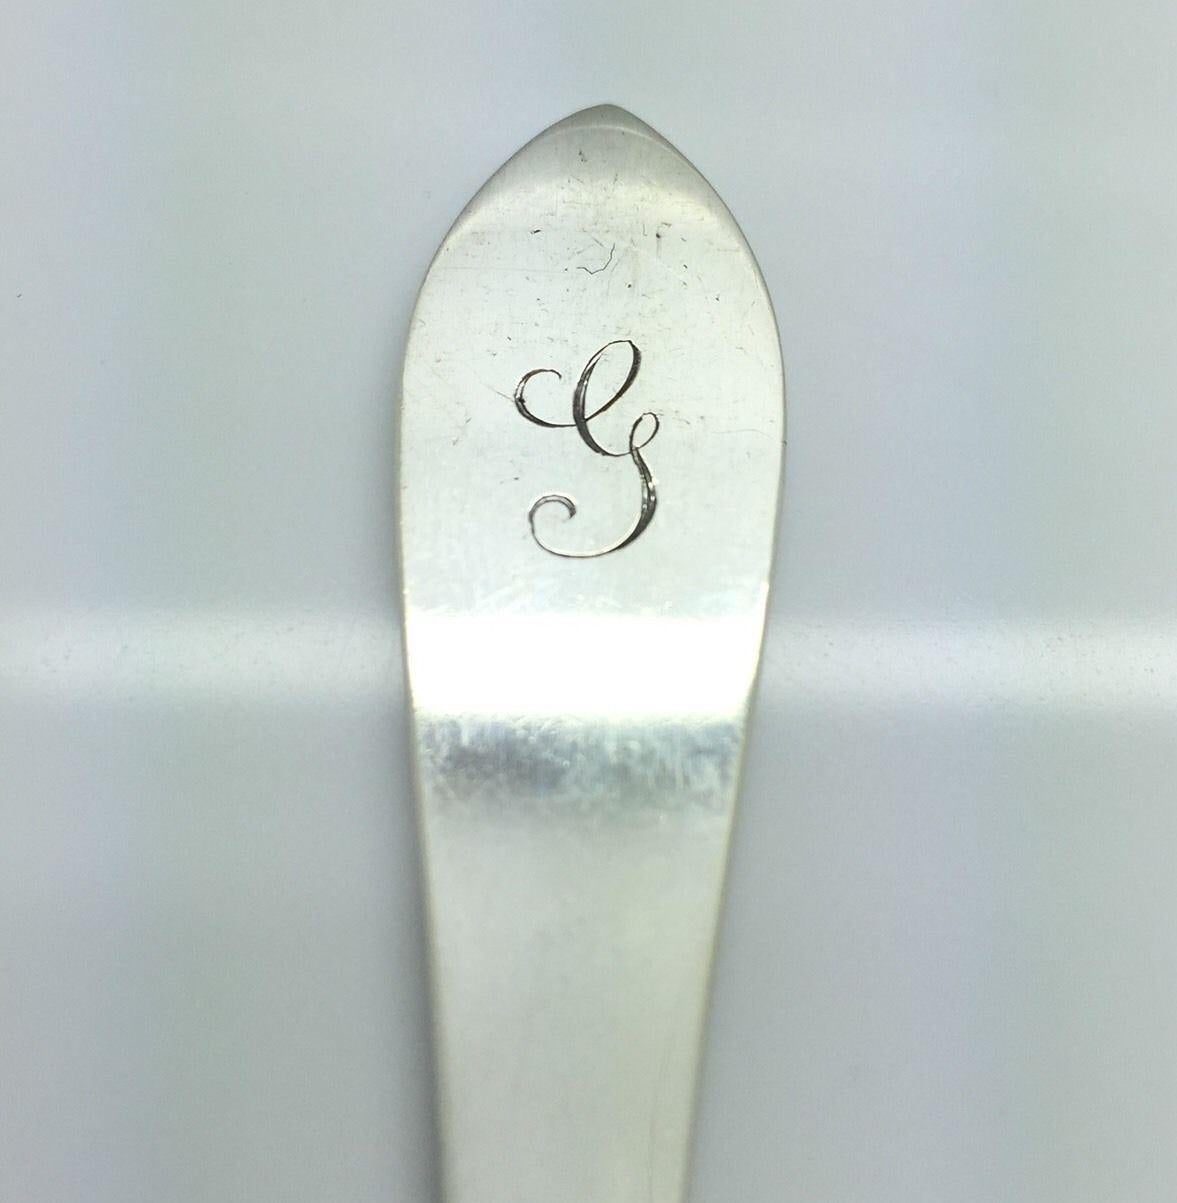 3 Tiffany & Co. sterling silver Faneuil 1910 pattern flat handle butter knives. Monogrammed with a 